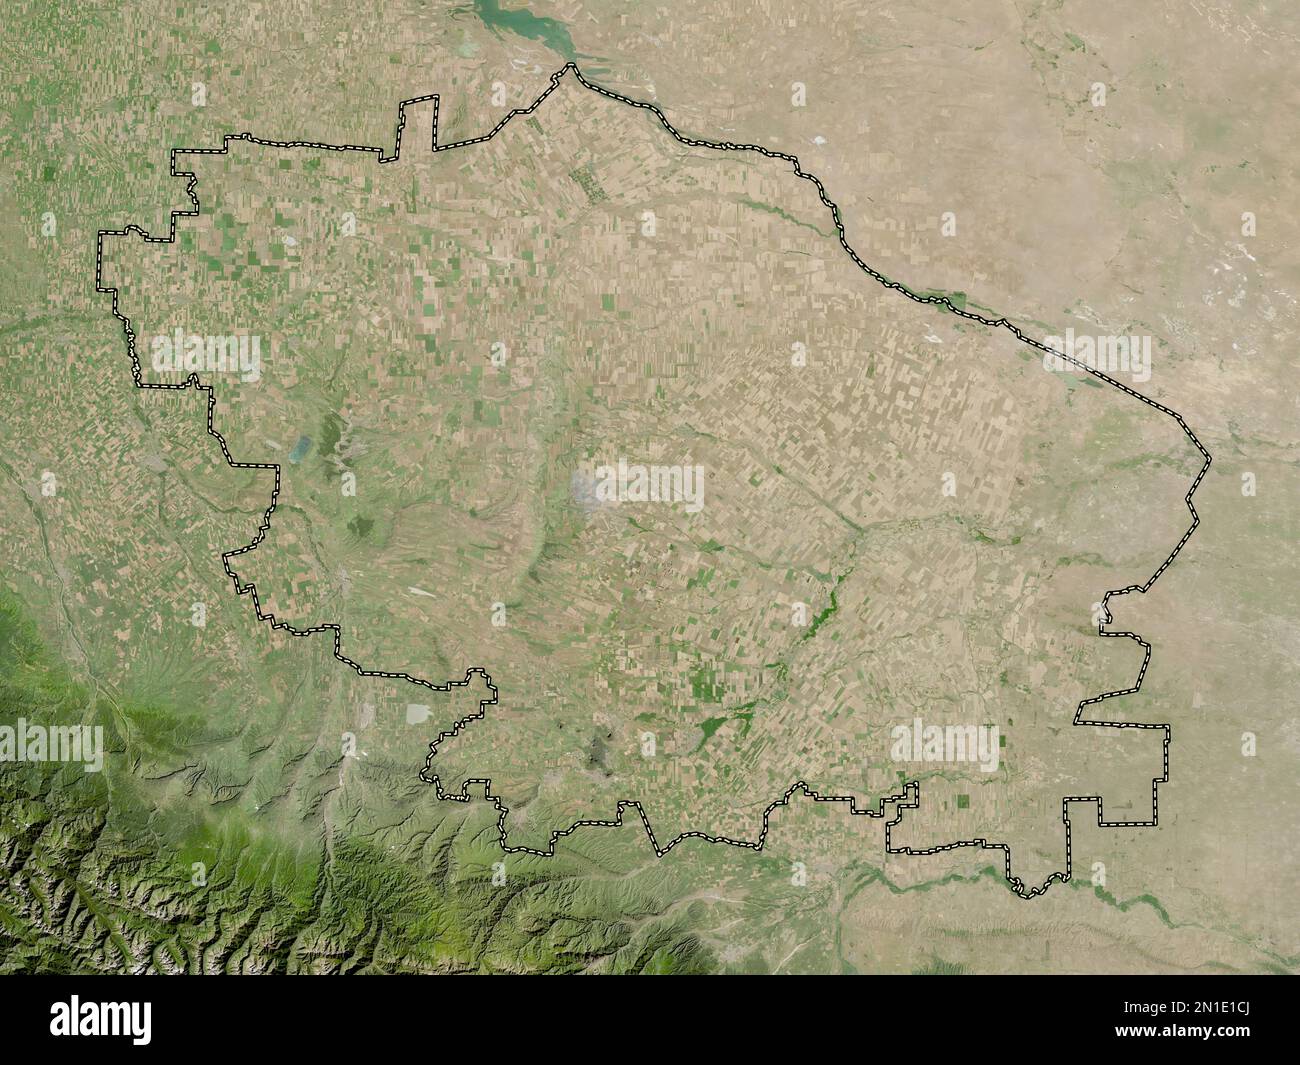 Stavropol', territory of Russia. Low resolution satellite map Stock Photo